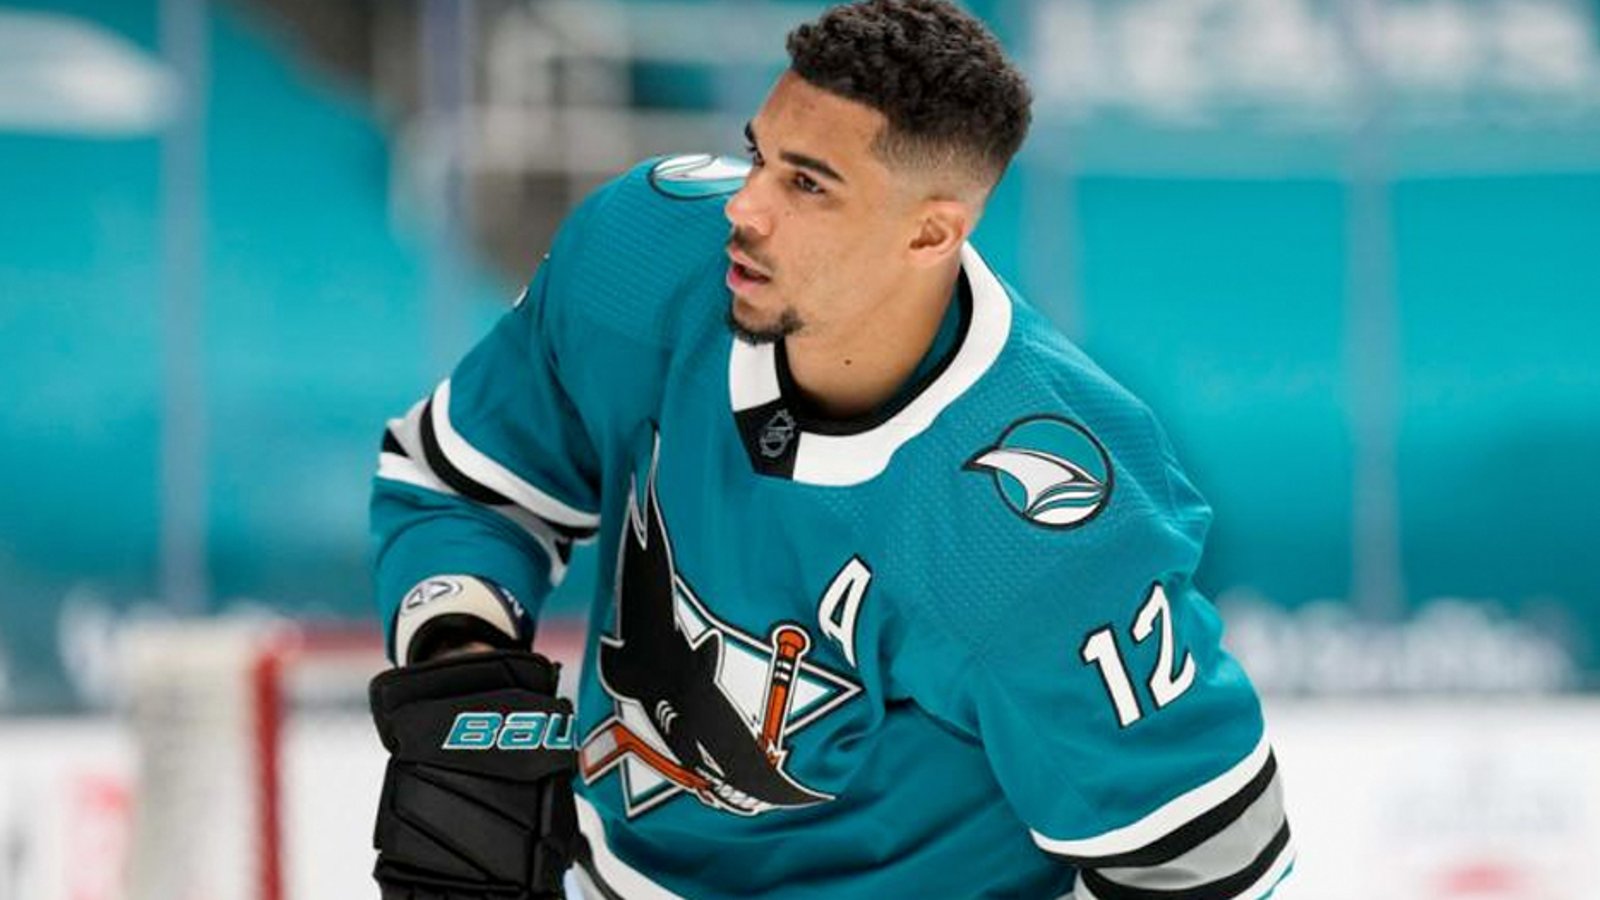 Report: An update on the NHL's investigation of Evander Kane